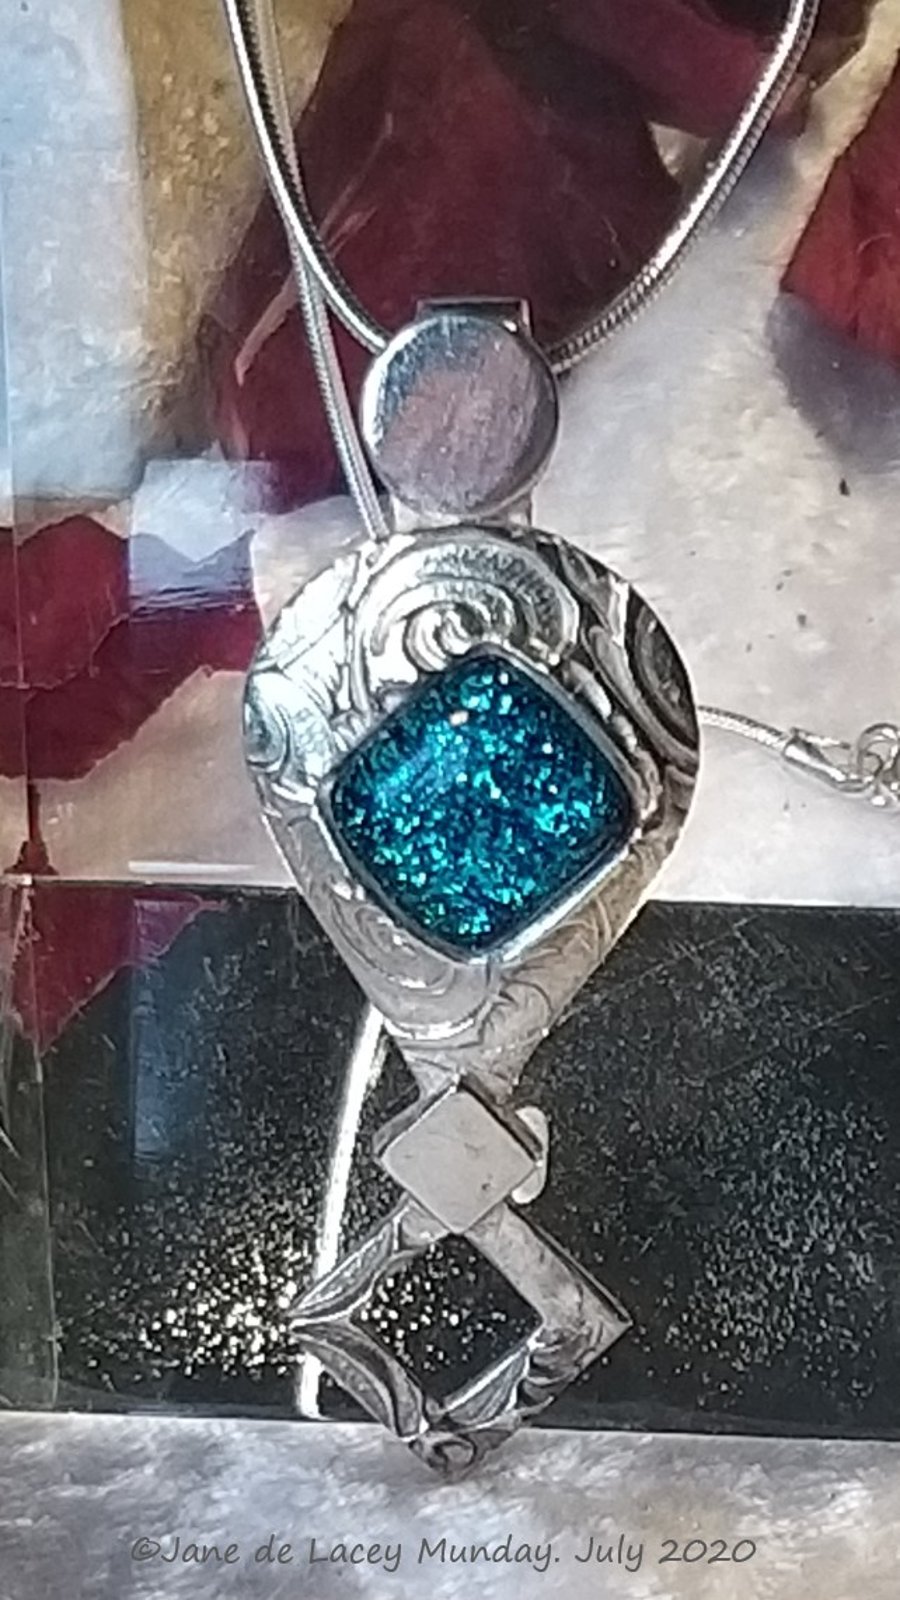 Fine Silver Pendant with Turquoise glitter fused glass Cabachon